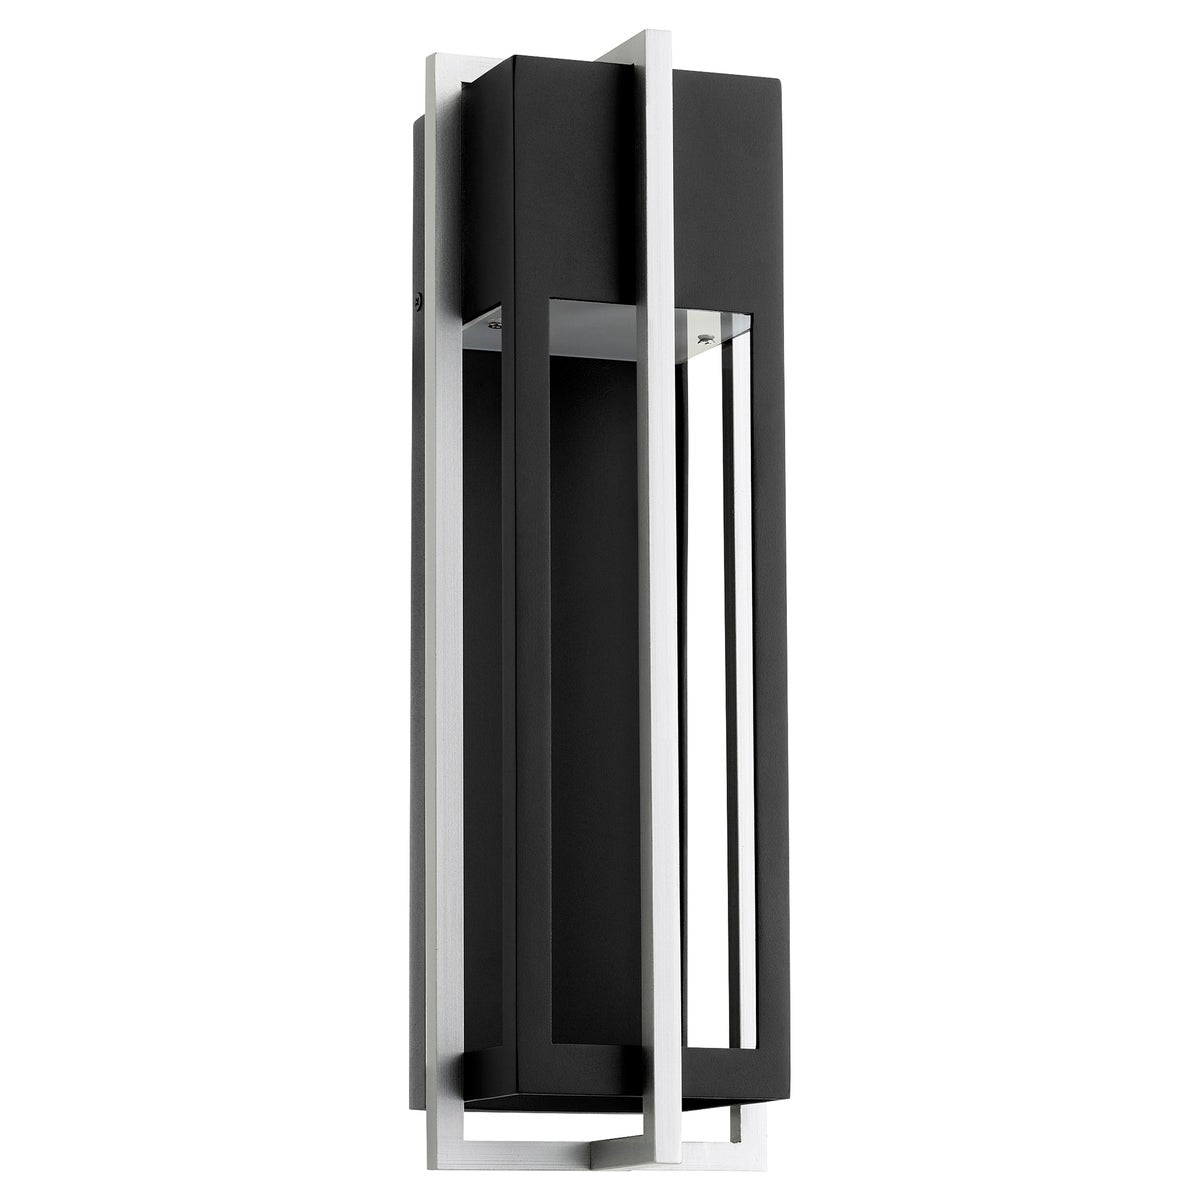 LED Outdoor Wall Light with geometric design and dual-layered frame. Noir/satin nickel finish adds sophistication to any contemporary outdoor setting. Provides guiding light for guests.